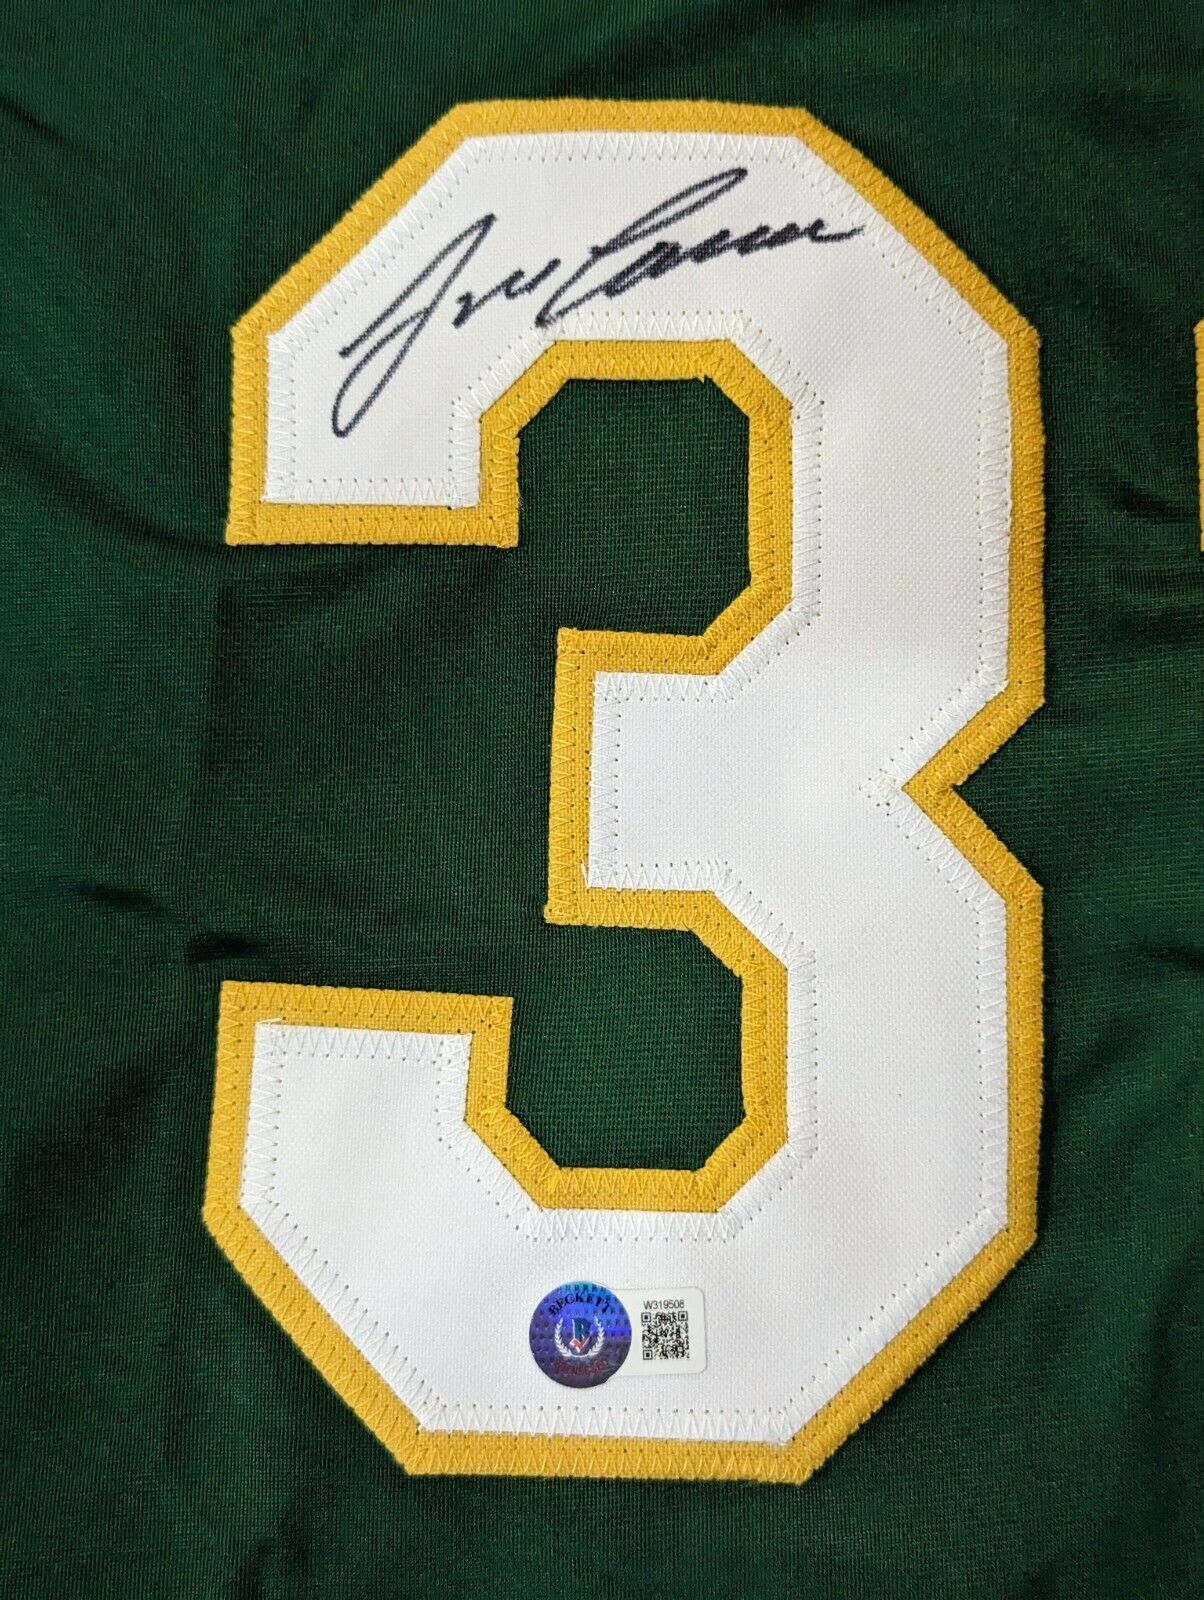 Jose Canseco Autographed and Framed Green Oakland A's Jersey